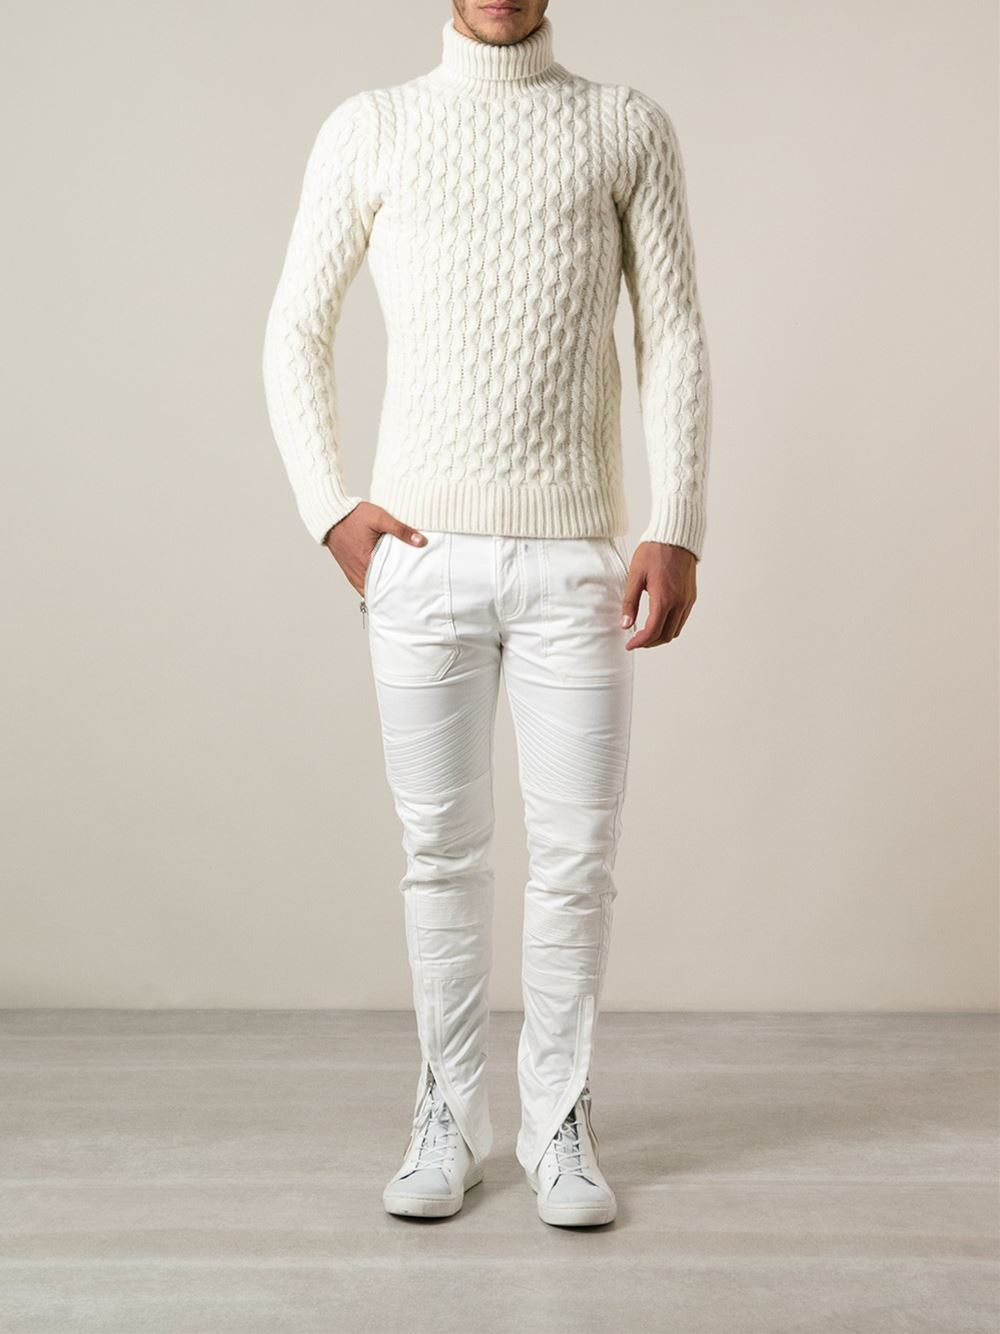 DIESEL Cable Knit Turtleneck Sweater in White for Men - Lyst